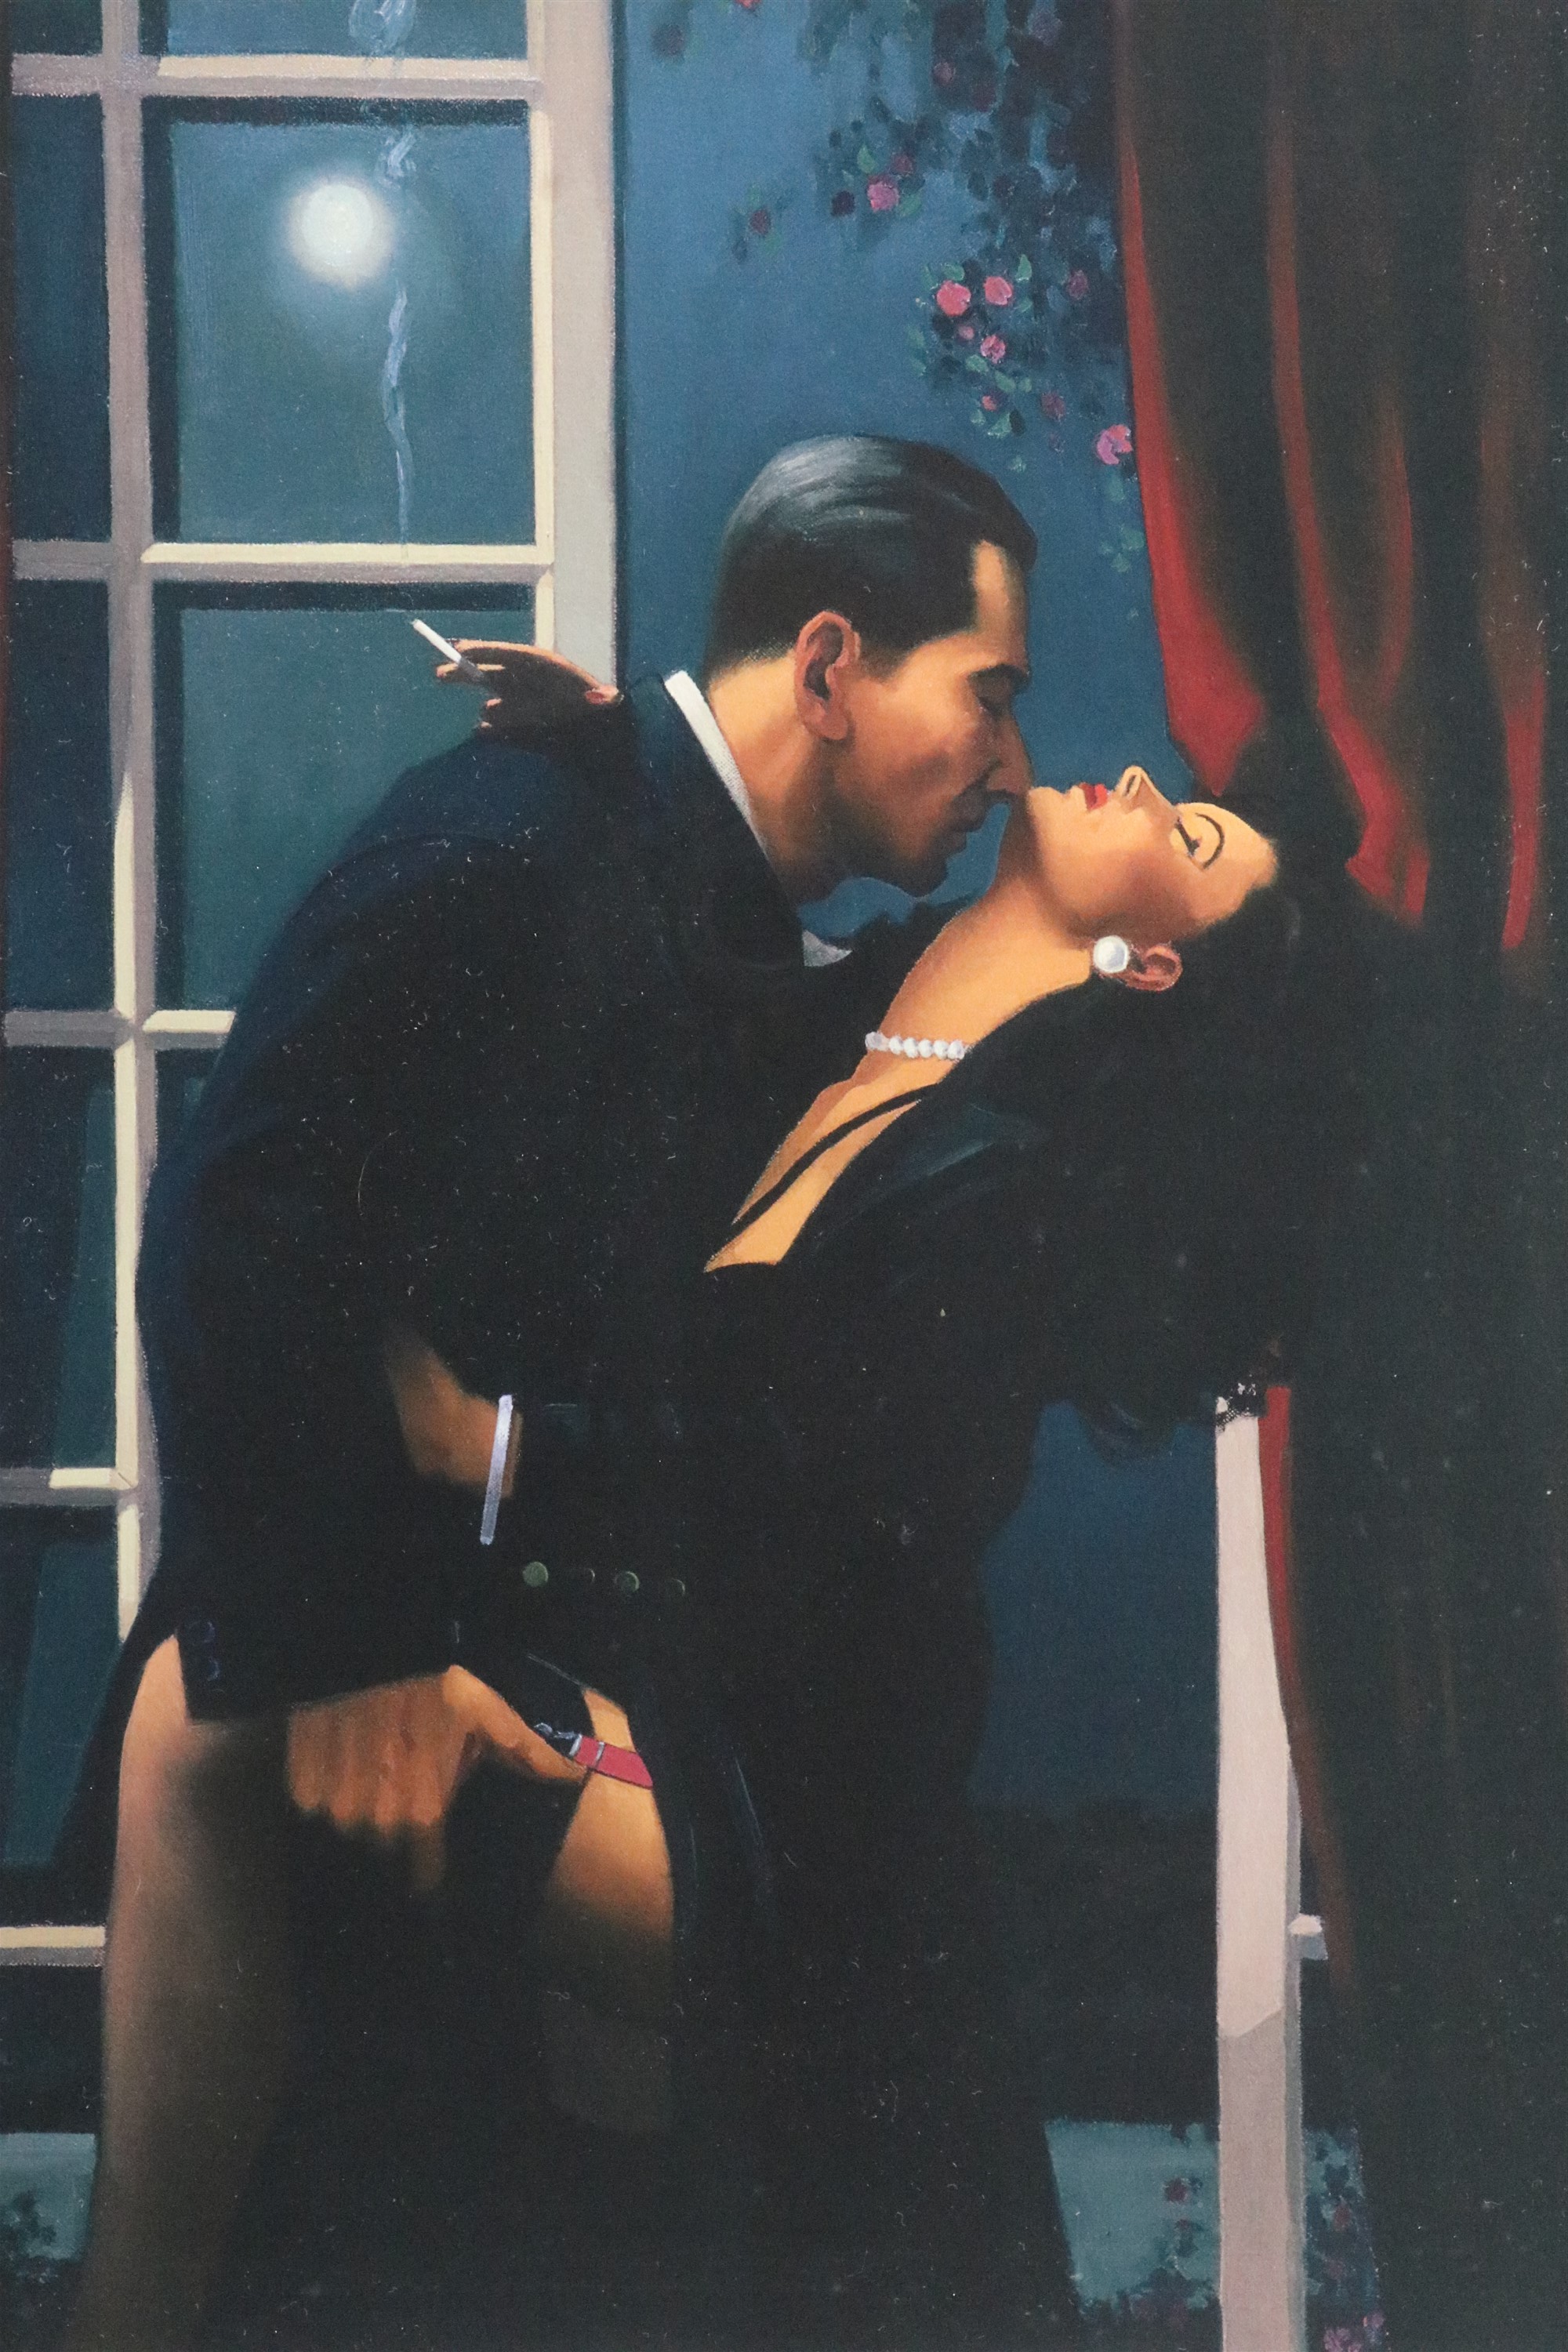 Jack Vettriano OBE (Contemporary) "Night Geometry", a film noir style portrayal of two lovers,